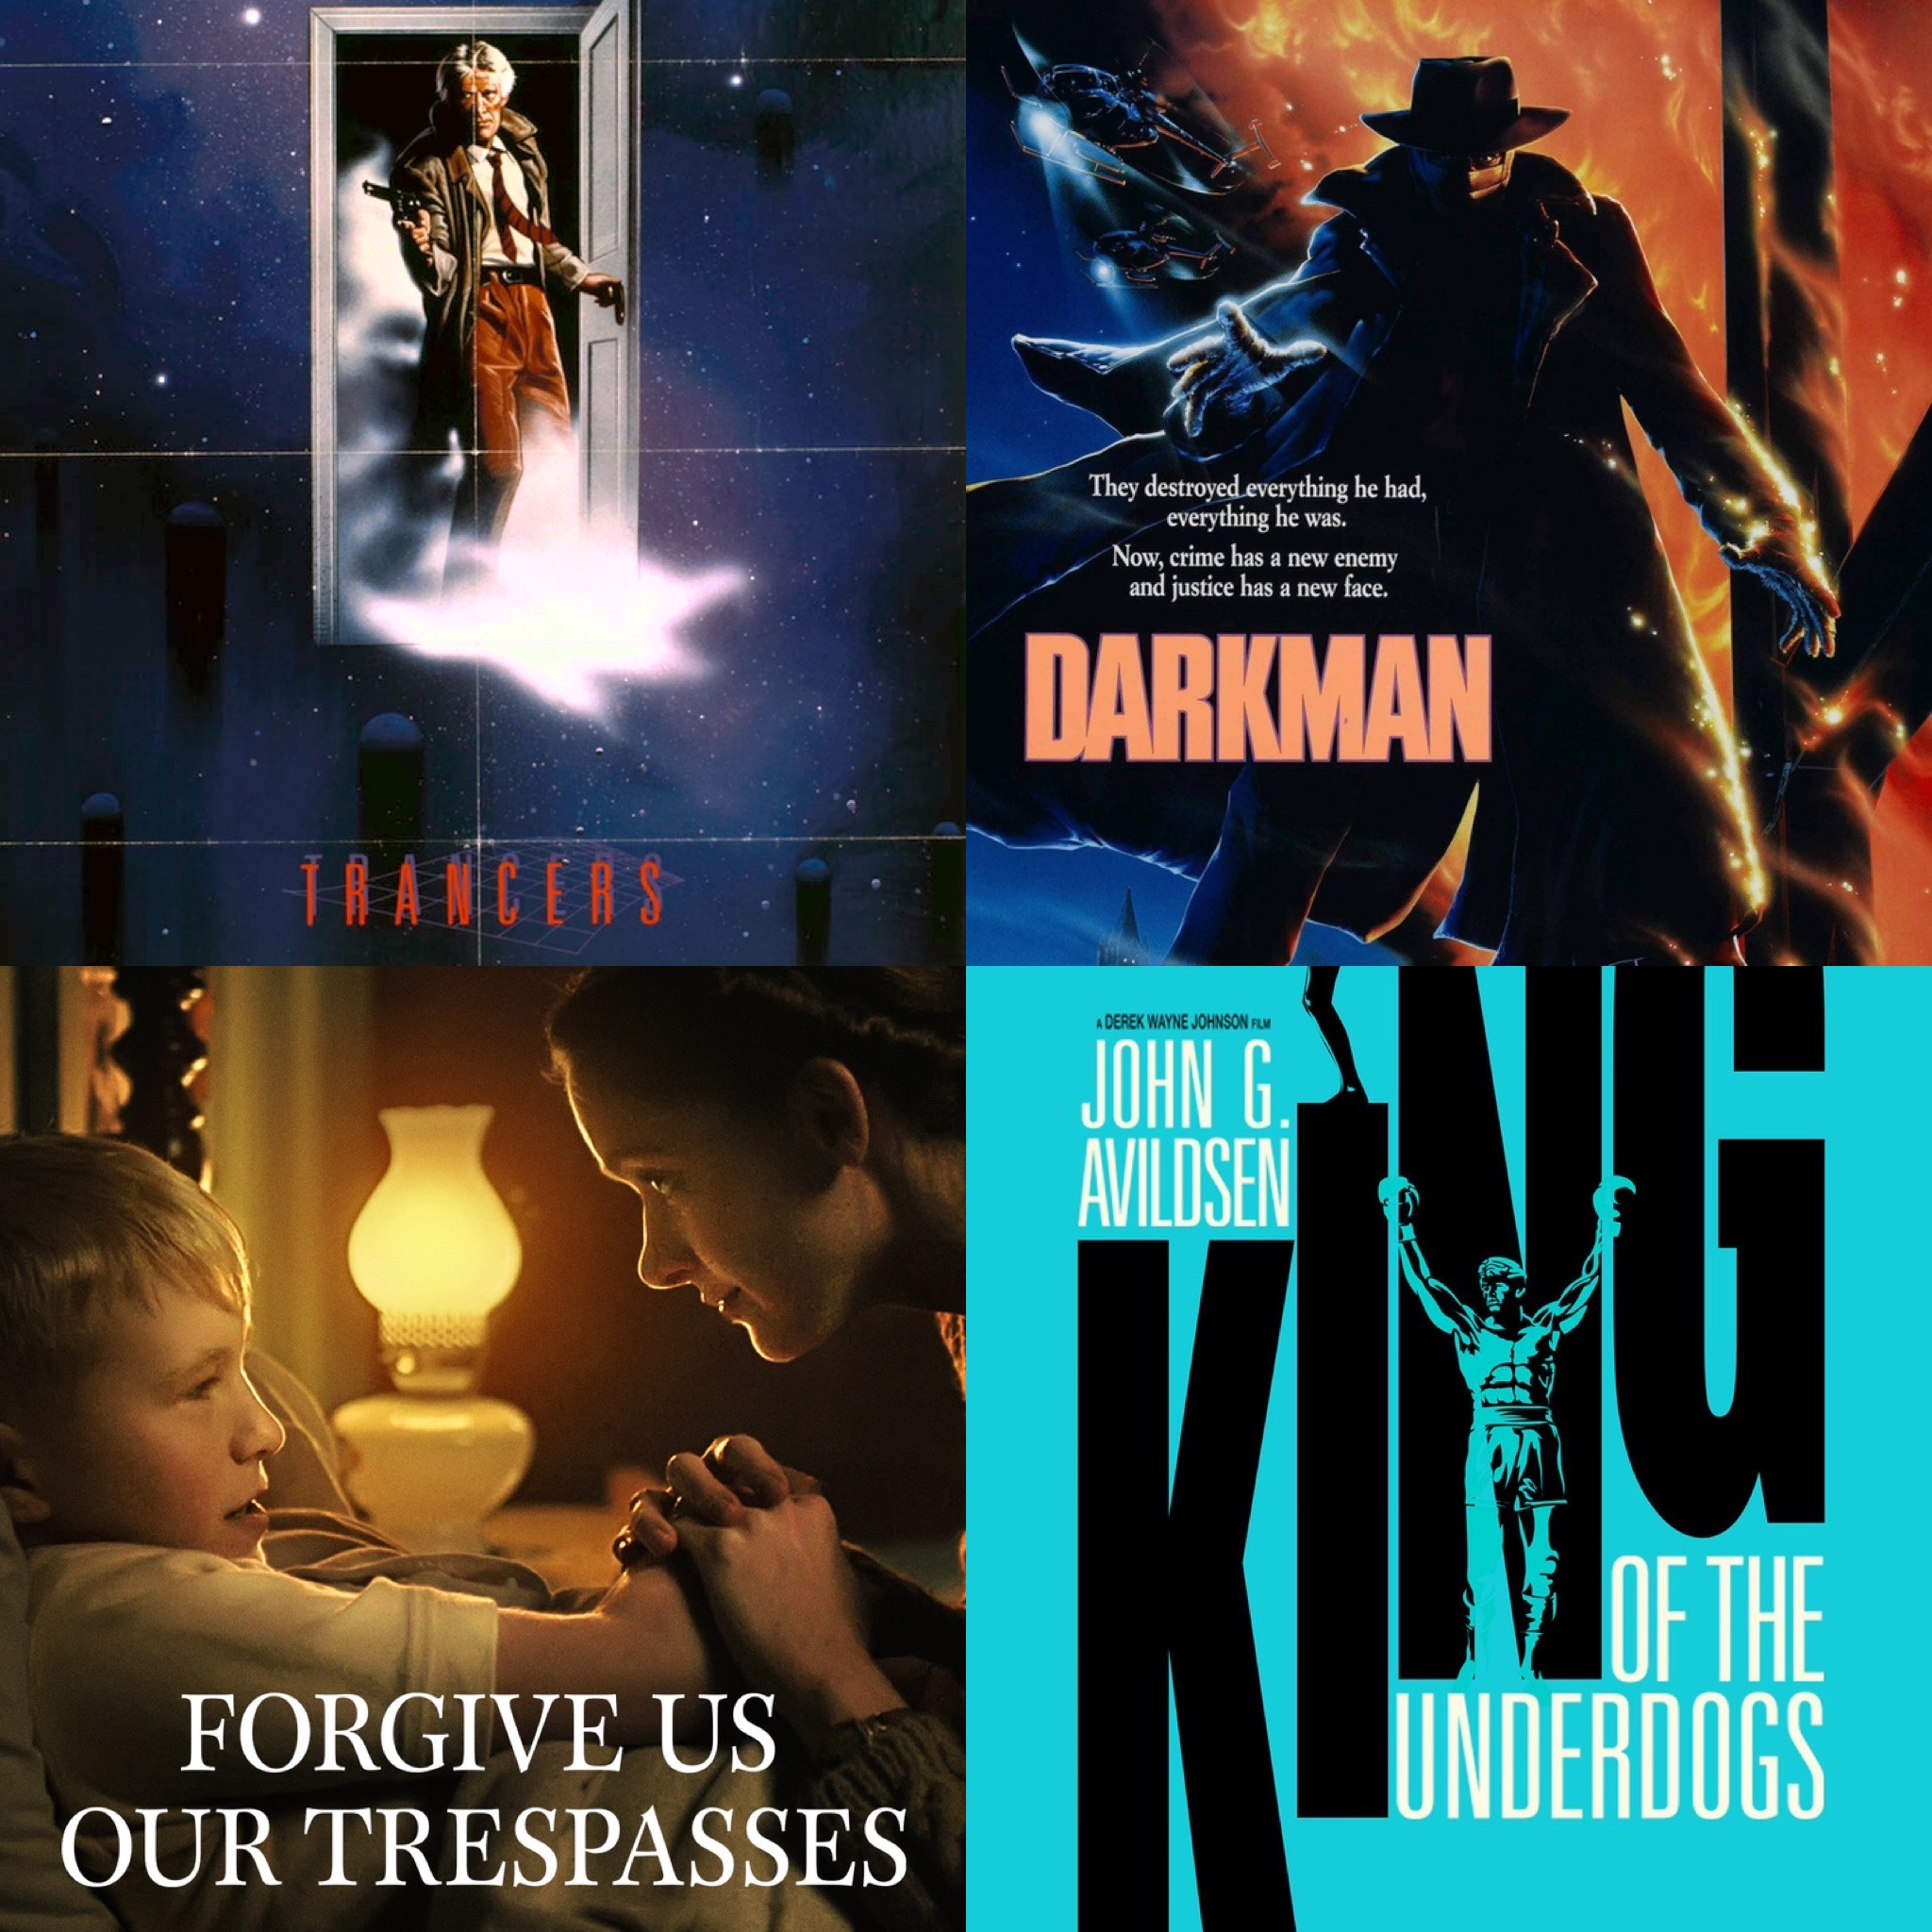 MOVIE MONDAY: Reviews of Darkman, Trancers, Forgive Us Our Trespasses, and King of the Underdogs